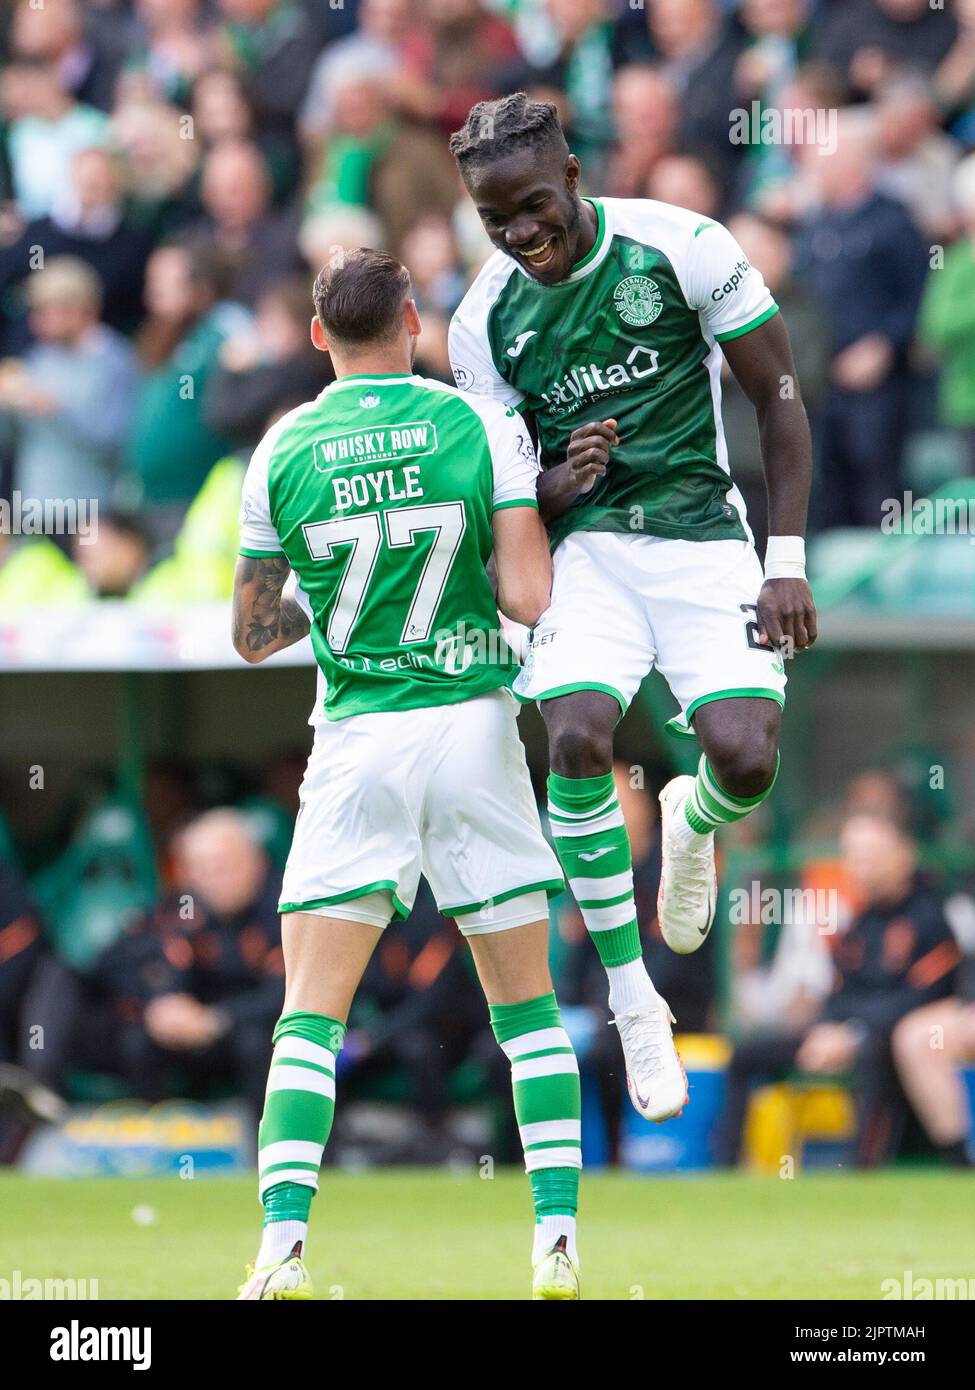 Edinburgh, UK. 20th Aug, 2022. Cinch Premiership - Hibernian v Rangers. 20/08/2022. Hibernian play host to Rangers in the cinch Premiership at Easter Road Stadium, Edinburgh, Midlothian, UK. Pic shows: HibsÕ Martin Boyle and Elie Youan celebrate after Boyle fires home the equaliser in the 51st minute to make the score 1-1. Credit: Ian Jacobs/Alamy Live News Stock Photo